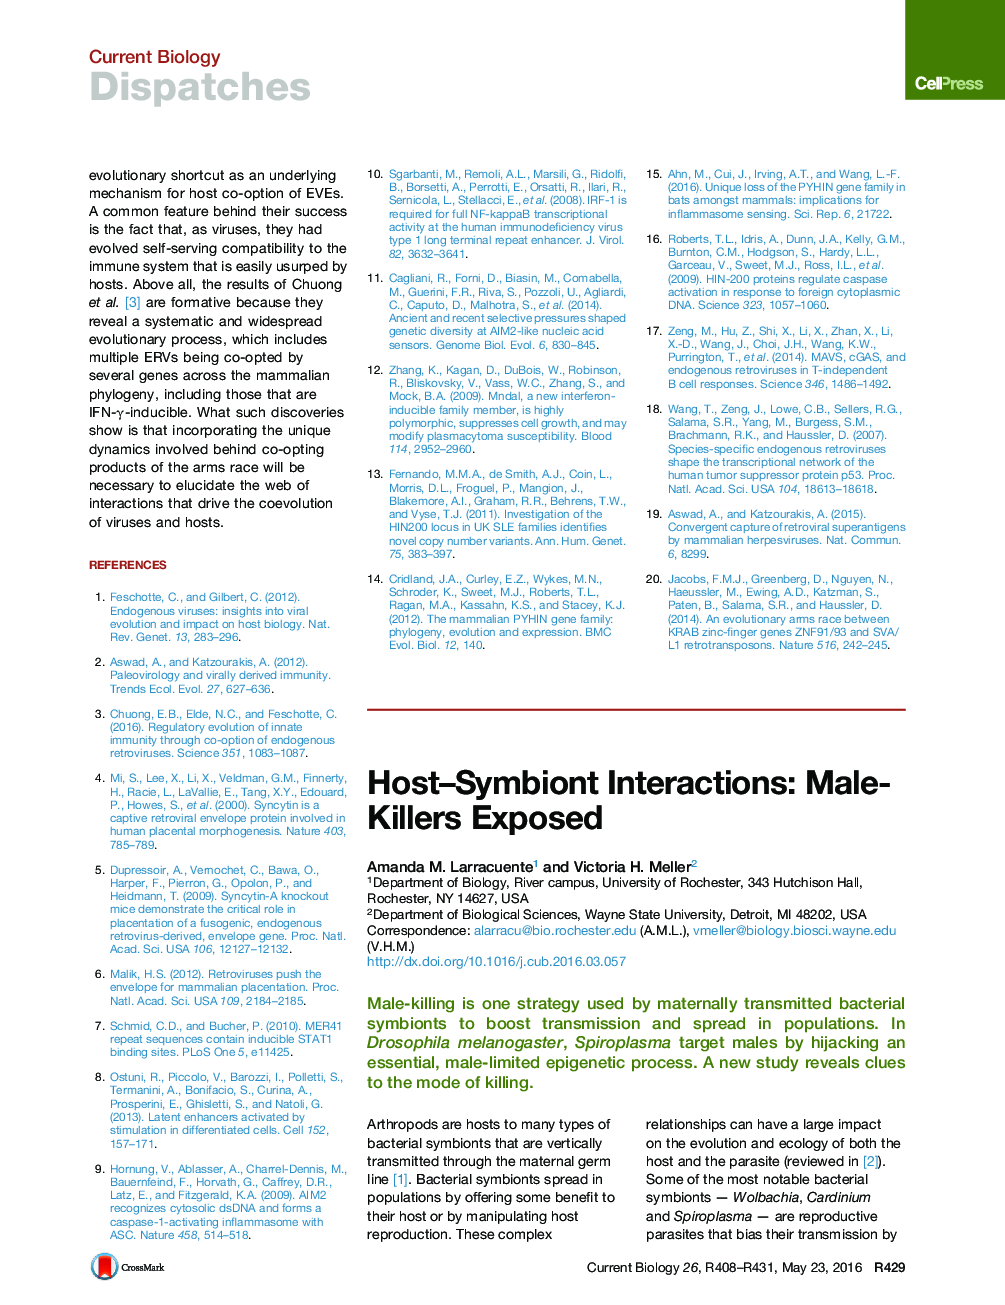 Host–Symbiont Interactions: Male-Killers Exposed